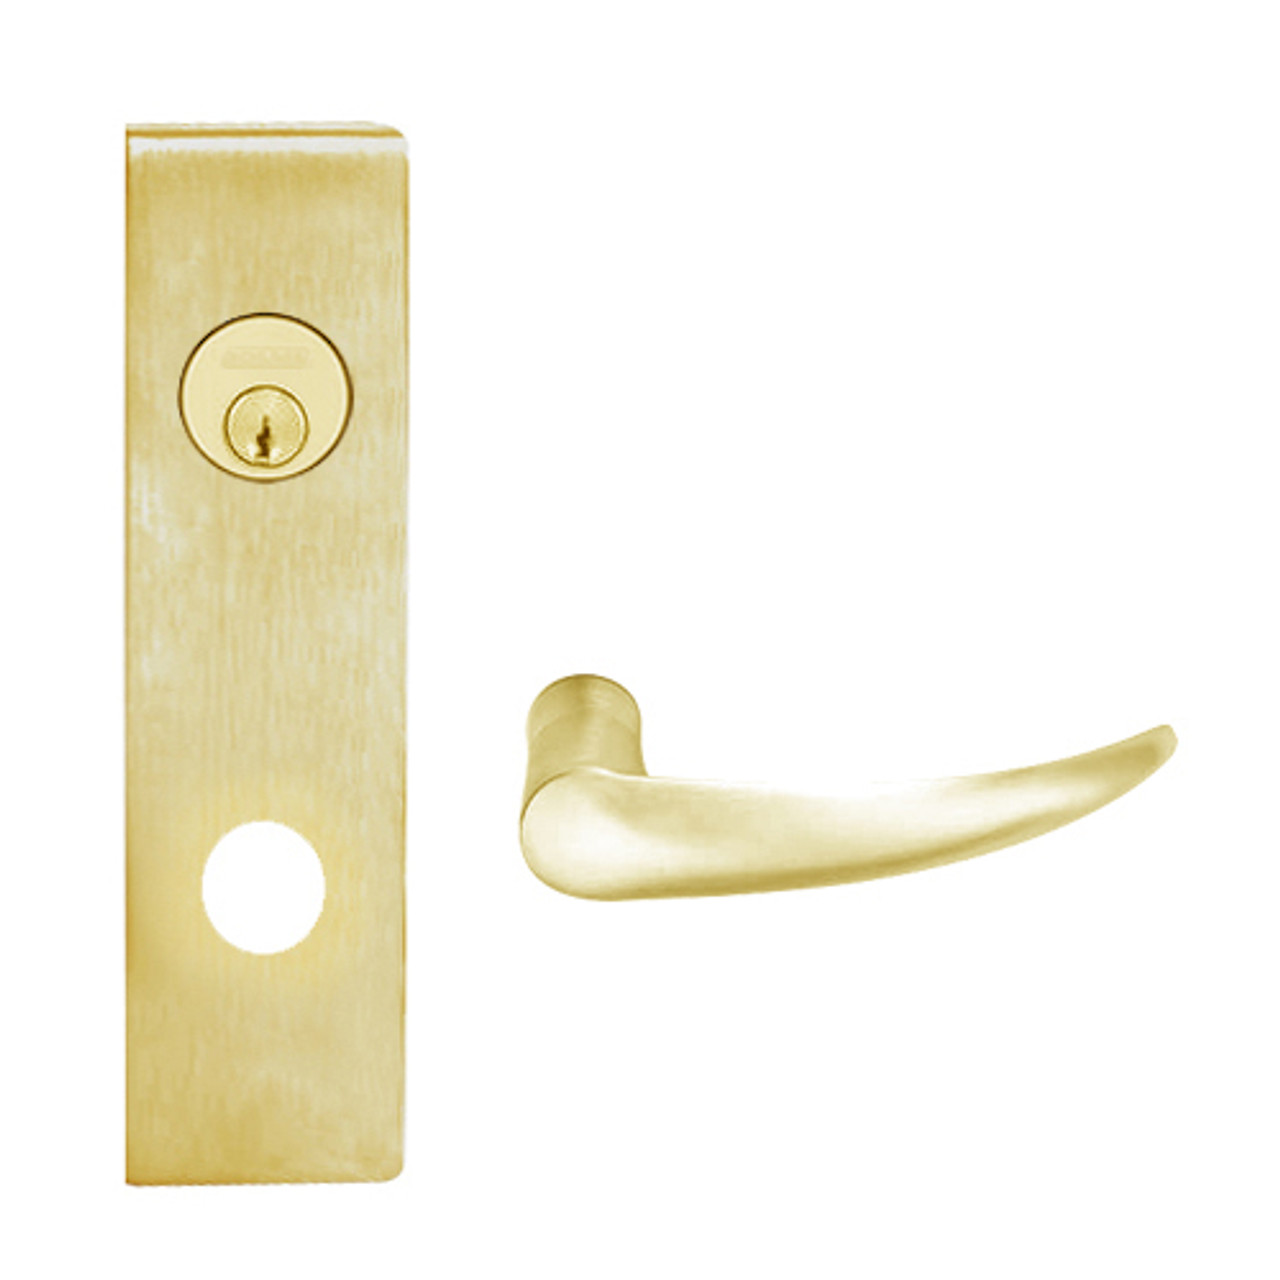 L9026P-OME-N-612 Schlage L Series Exit Lock with Cylinder Commercial Mortise Lock with Omega Lever Design in Satin Bronze